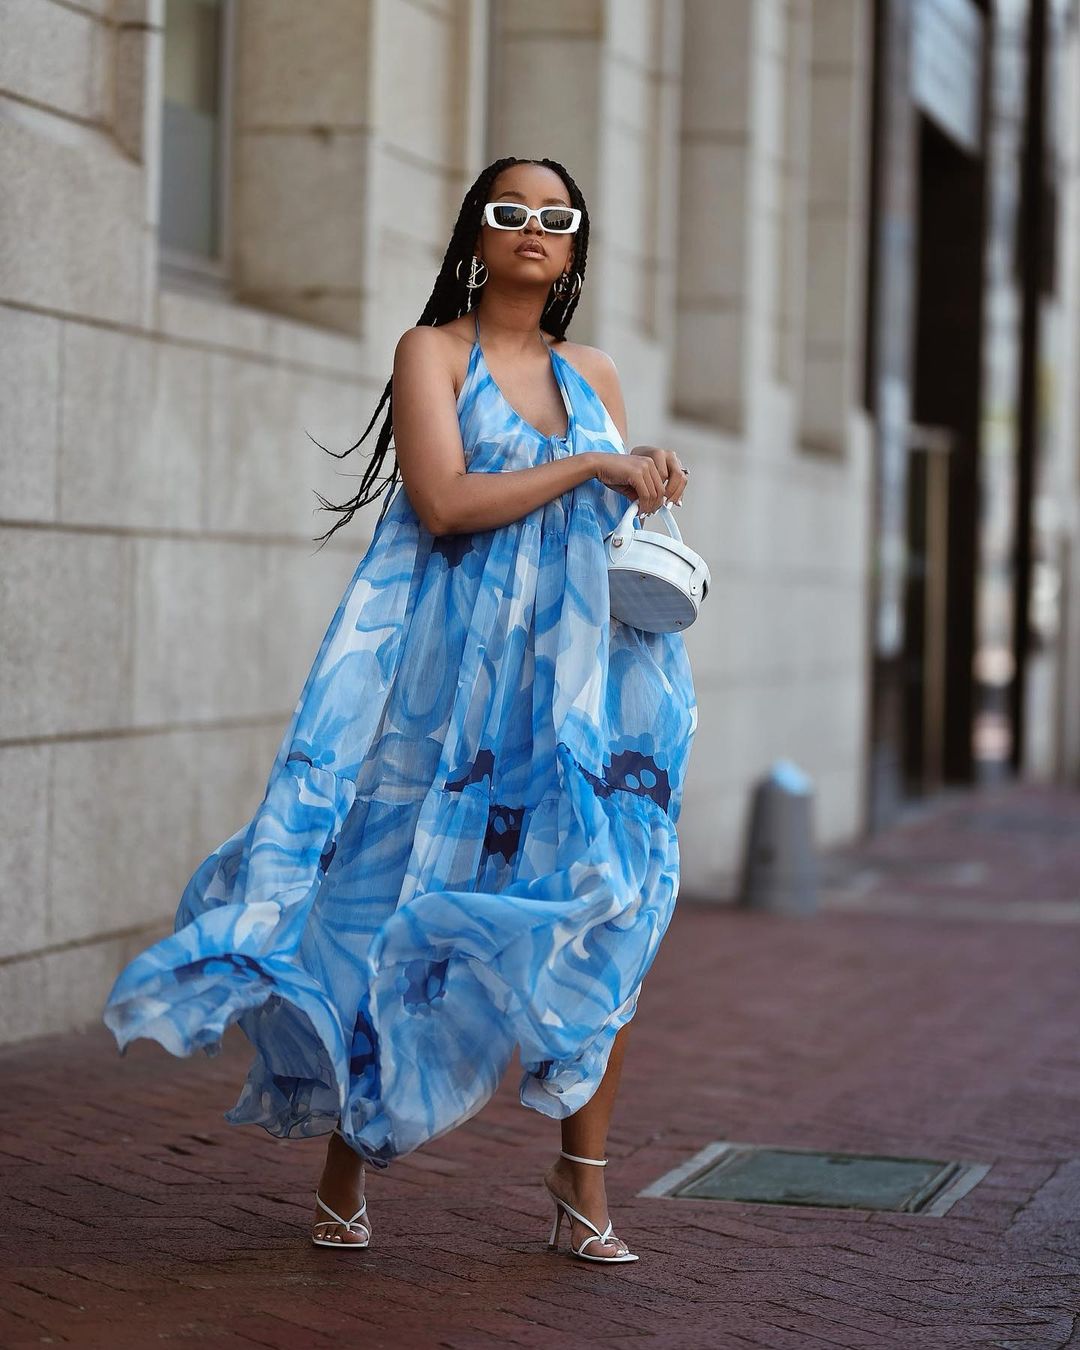 lerato-kgamanyane-shows-how-to-wear-flowy-dress-south-african-woman